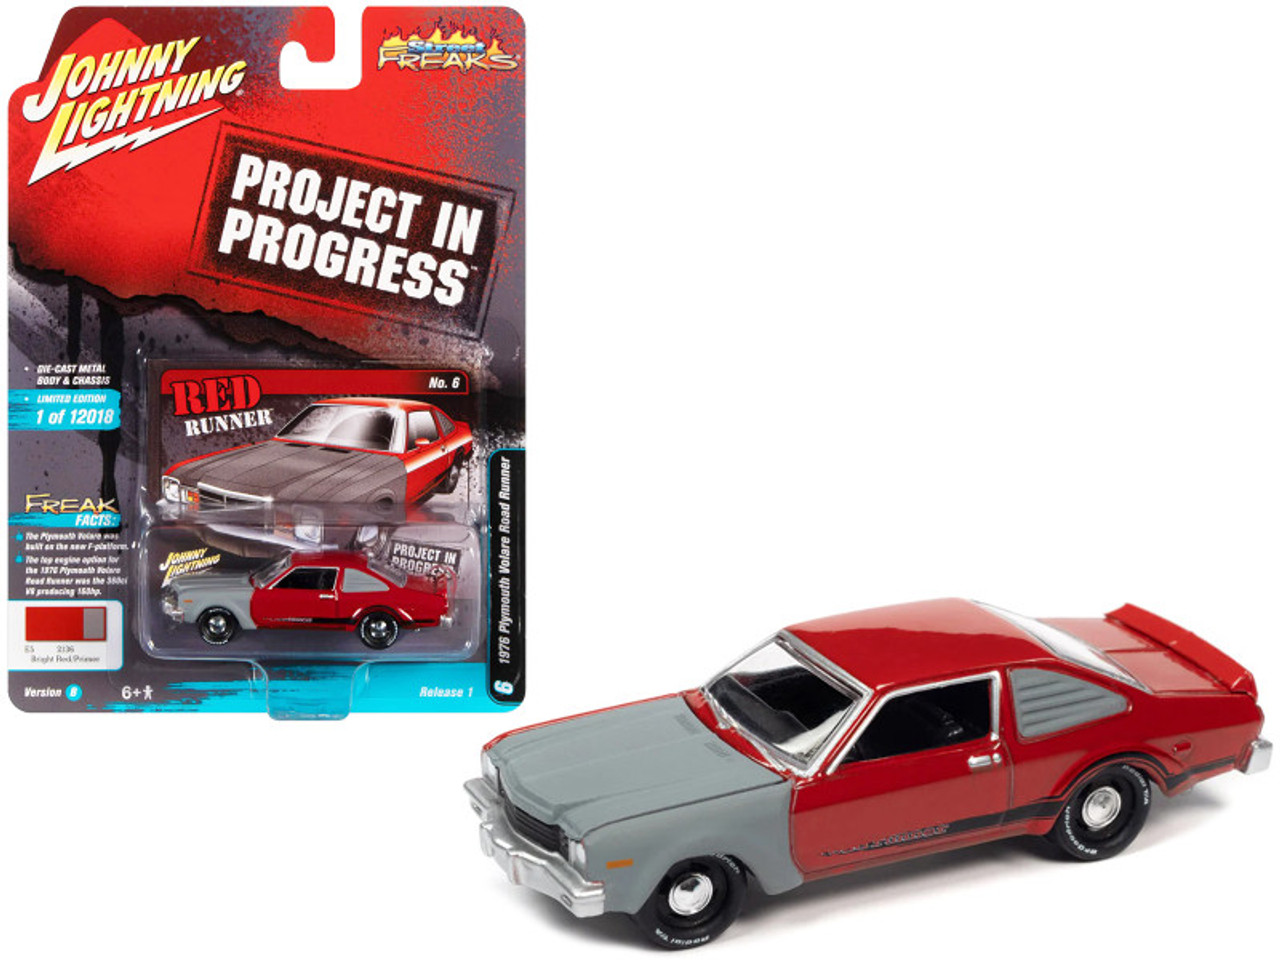 1976 Plymouth Volare Road Runner Bright Red and Primer Gray with Black Stripes "Project in Progress" Limited Edition to 12018 pieces Worldwide "Street Freaks" Series 1/64 Diecast Model Car by Johnny Lightning